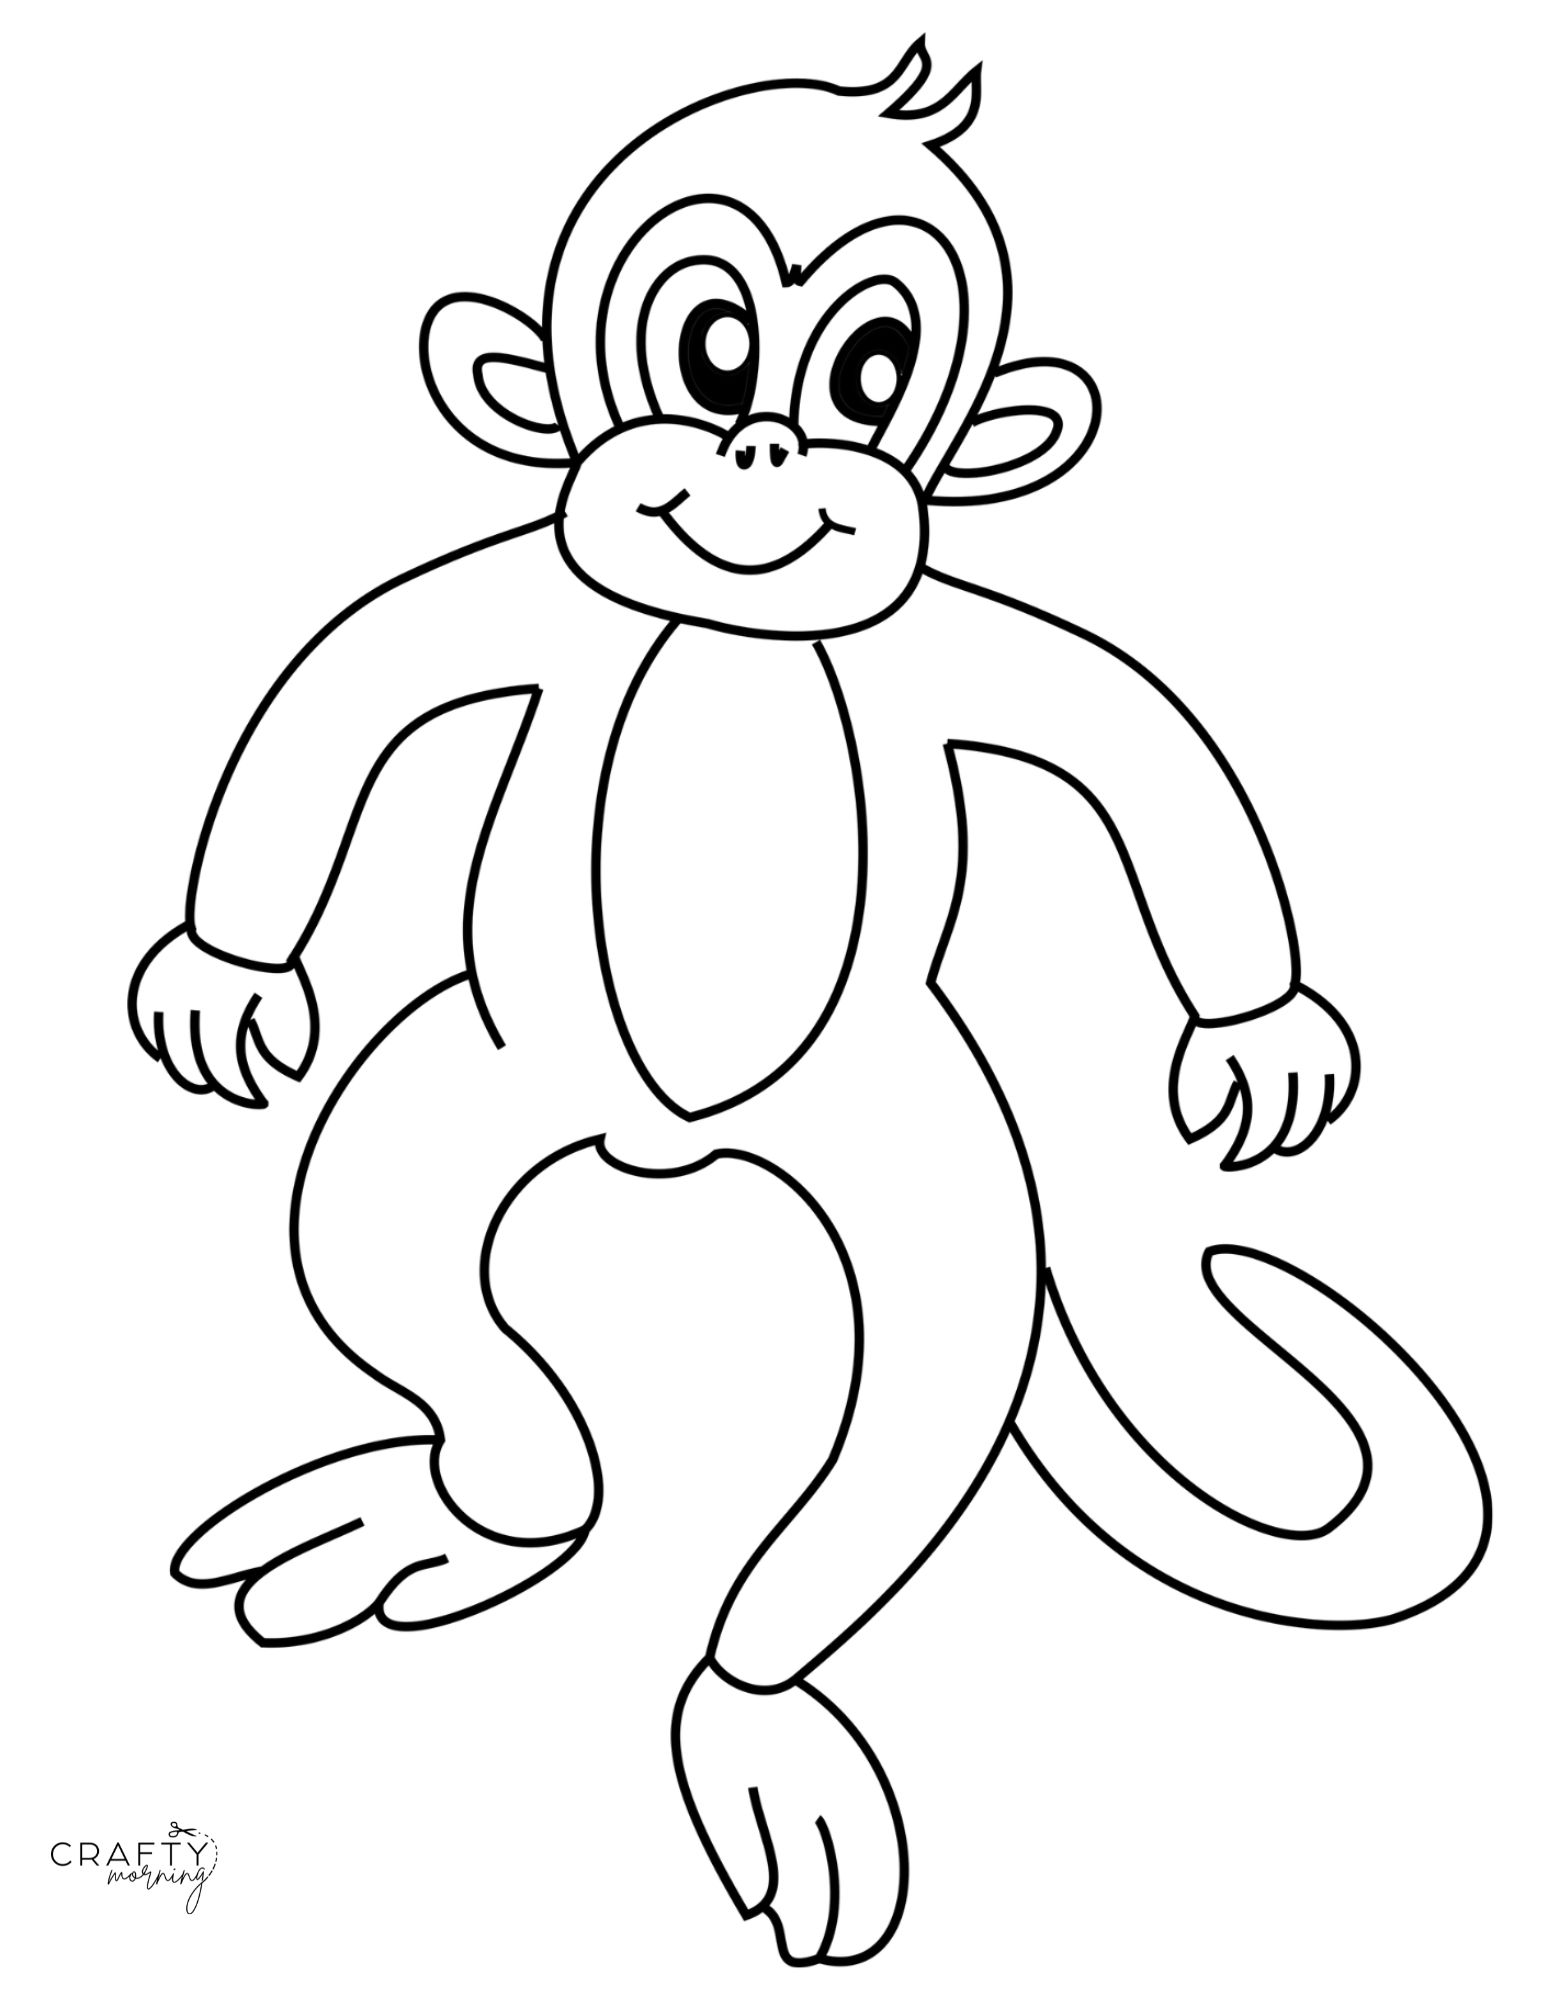 Monkey Coloring Page Stock Illustrations – 1,898 Monkey Coloring Page Stock  Illustrations, Vectors & Clipart - Dreamstime